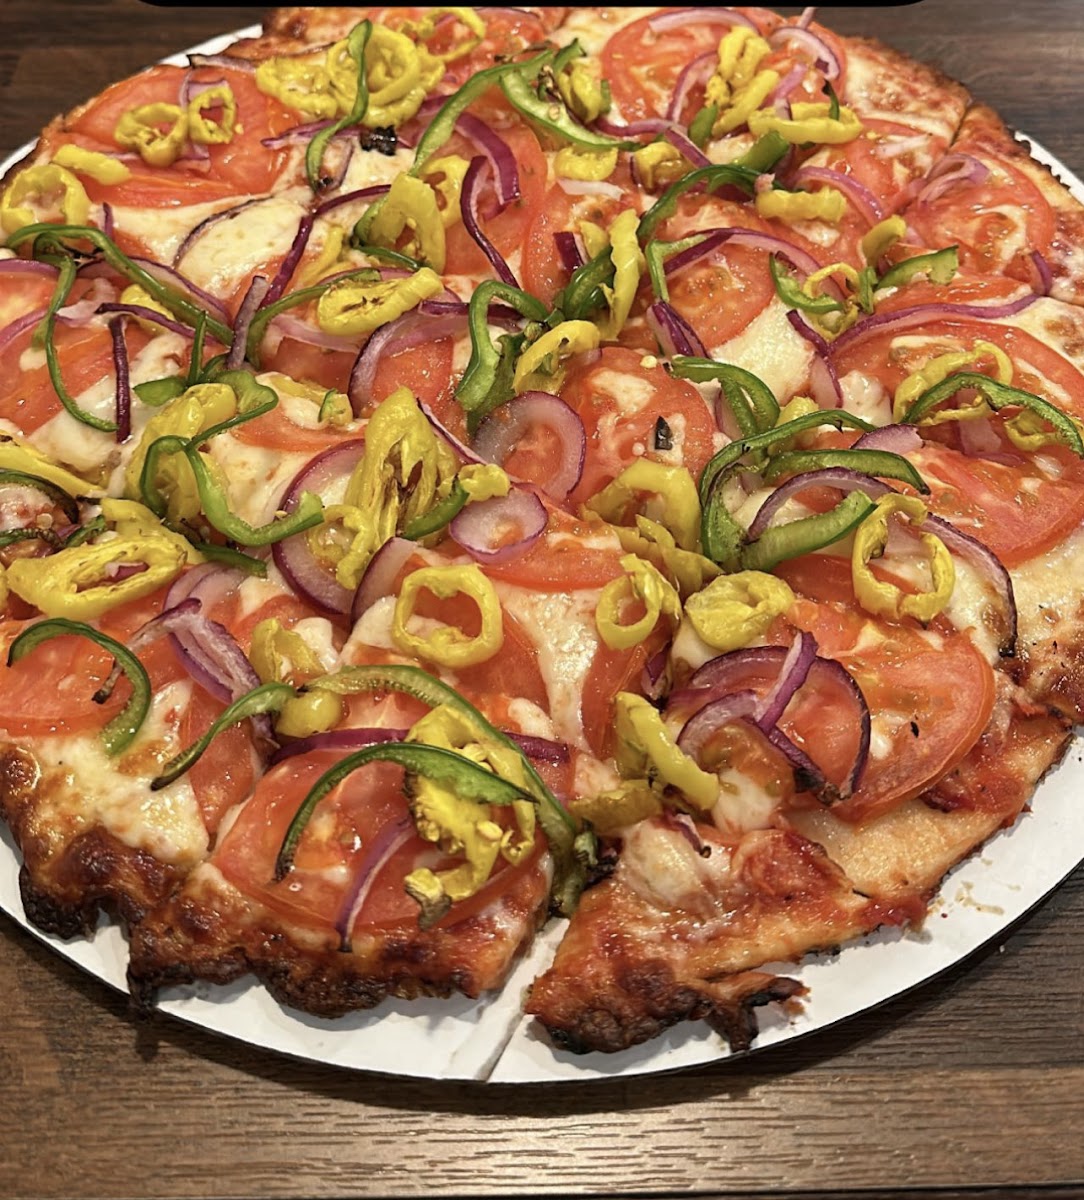 Gluten-Free at The Crust Pizza